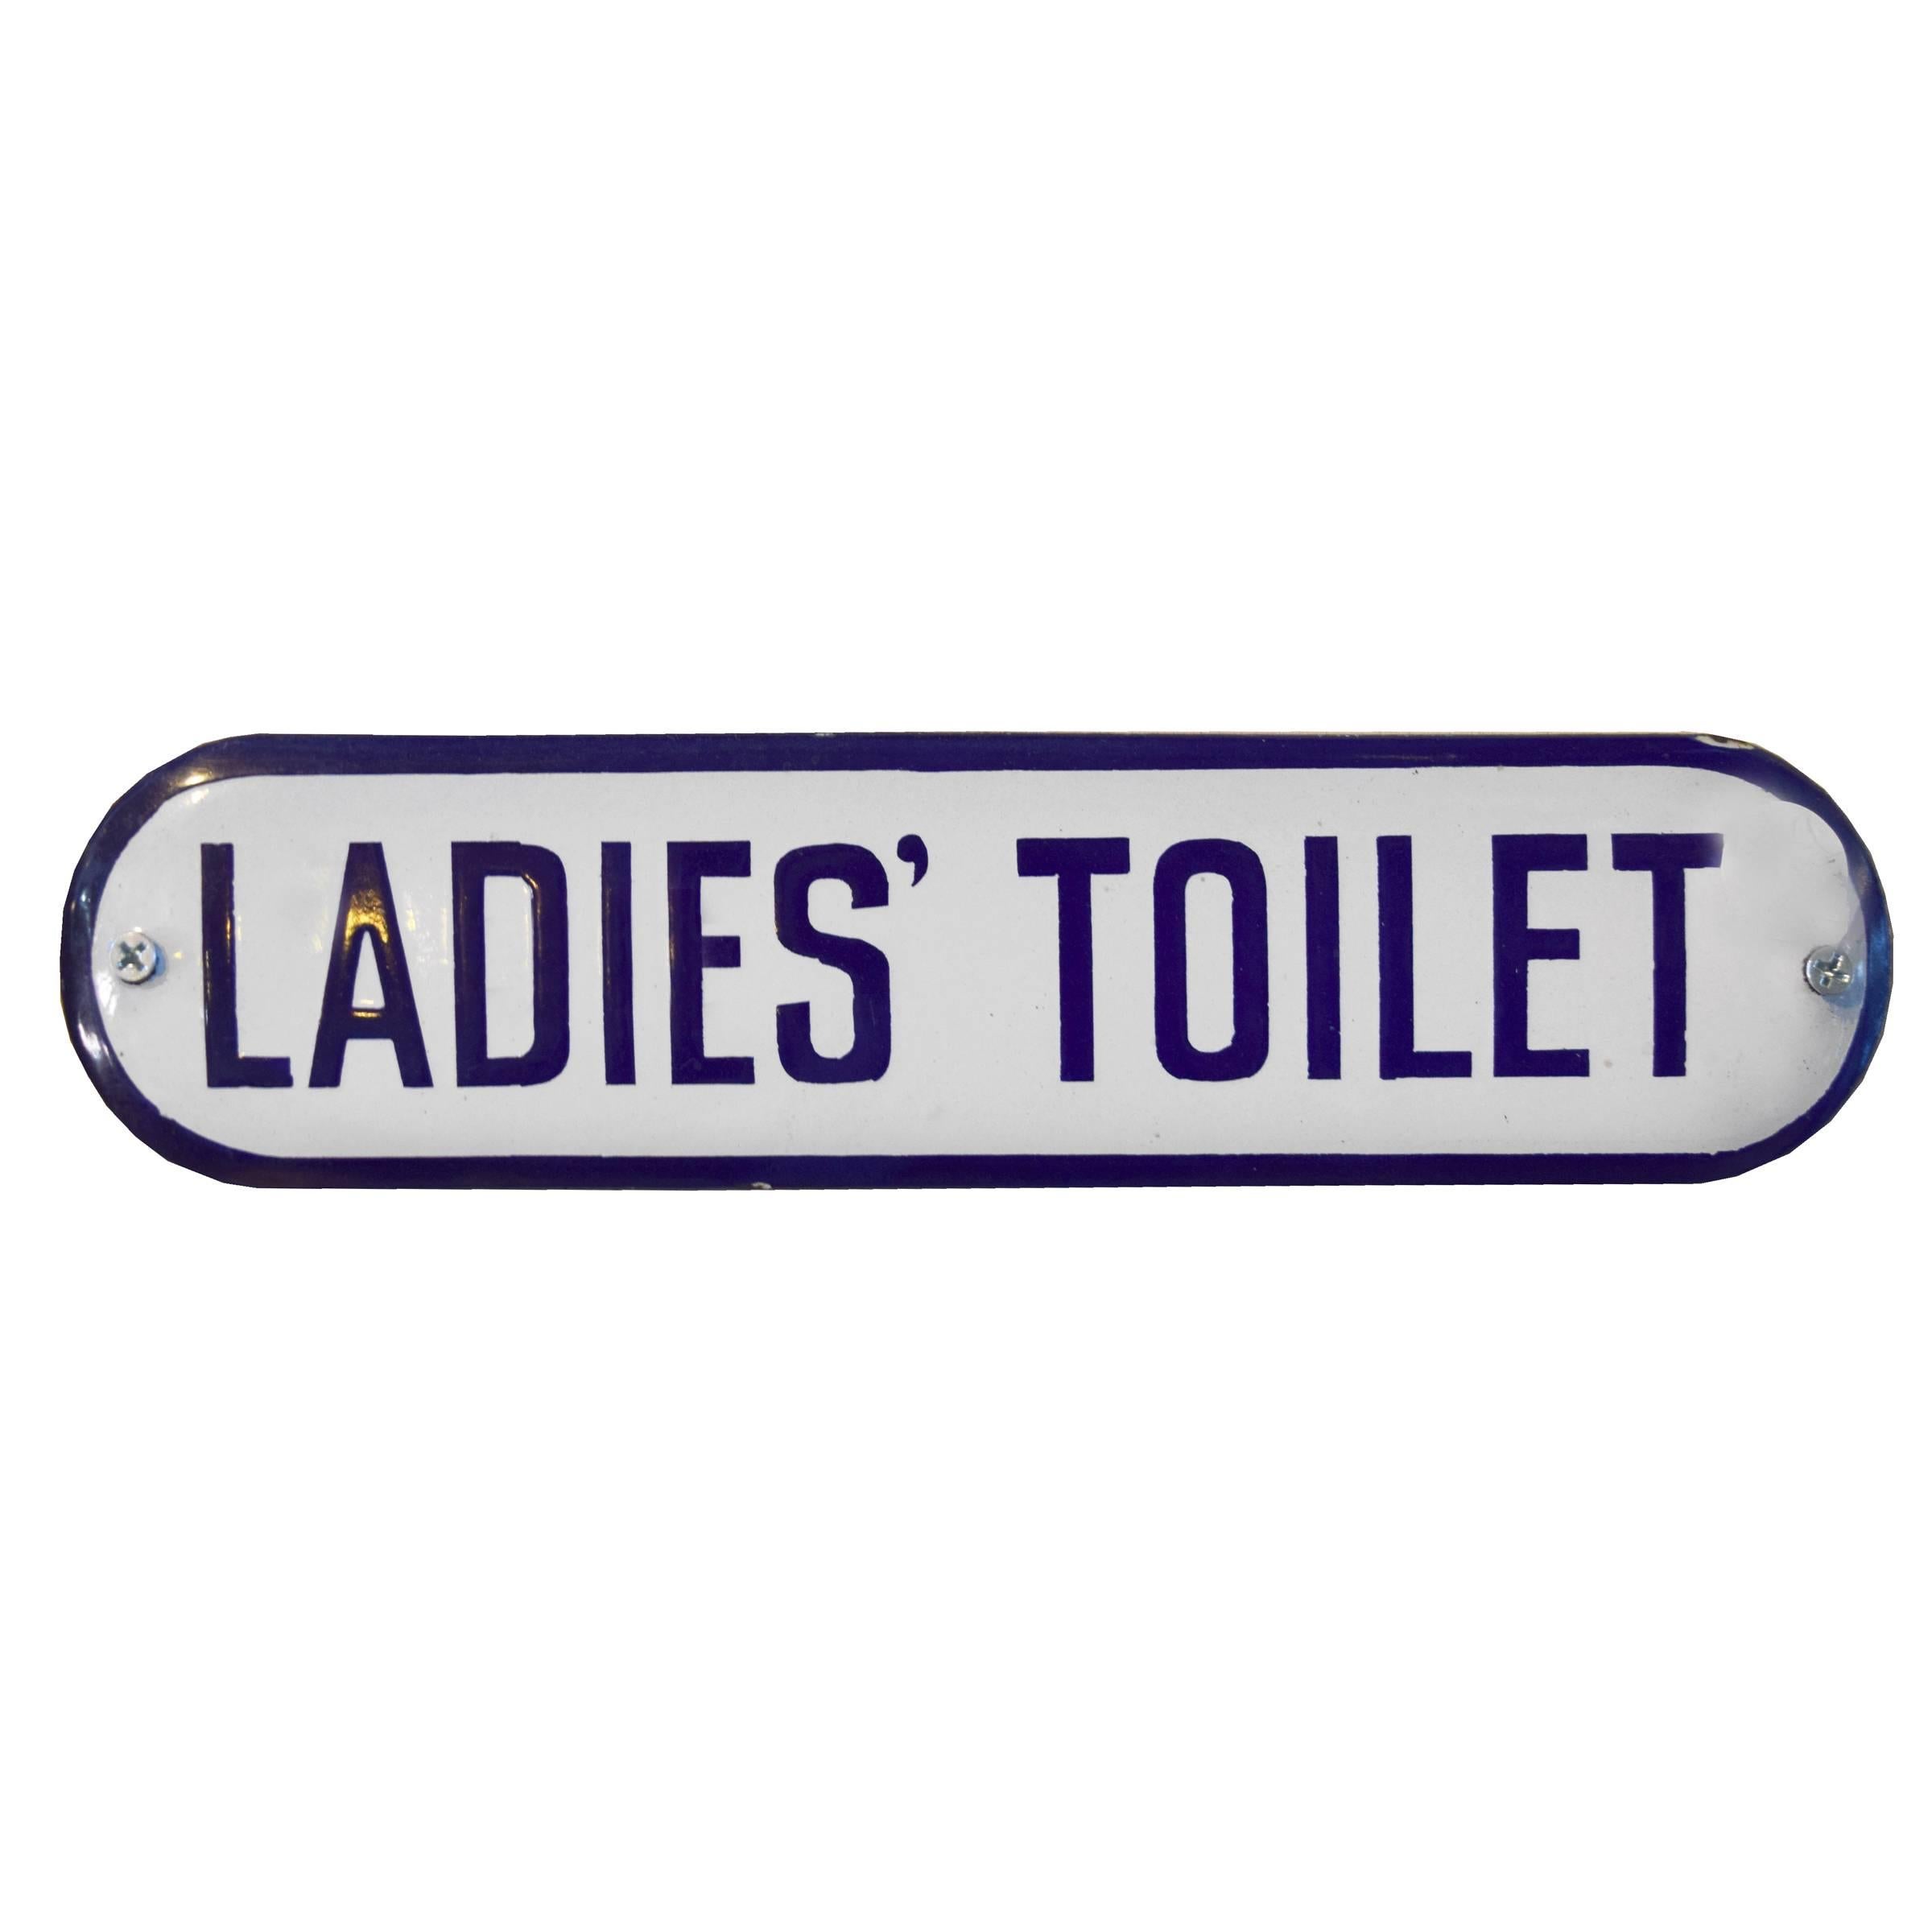 A fun pair of Ladies' Toilet and Gents' Toilet porcelain enameled metal signs with slightly convex forms, rounded ends, and dark blue text, circa 1930.
